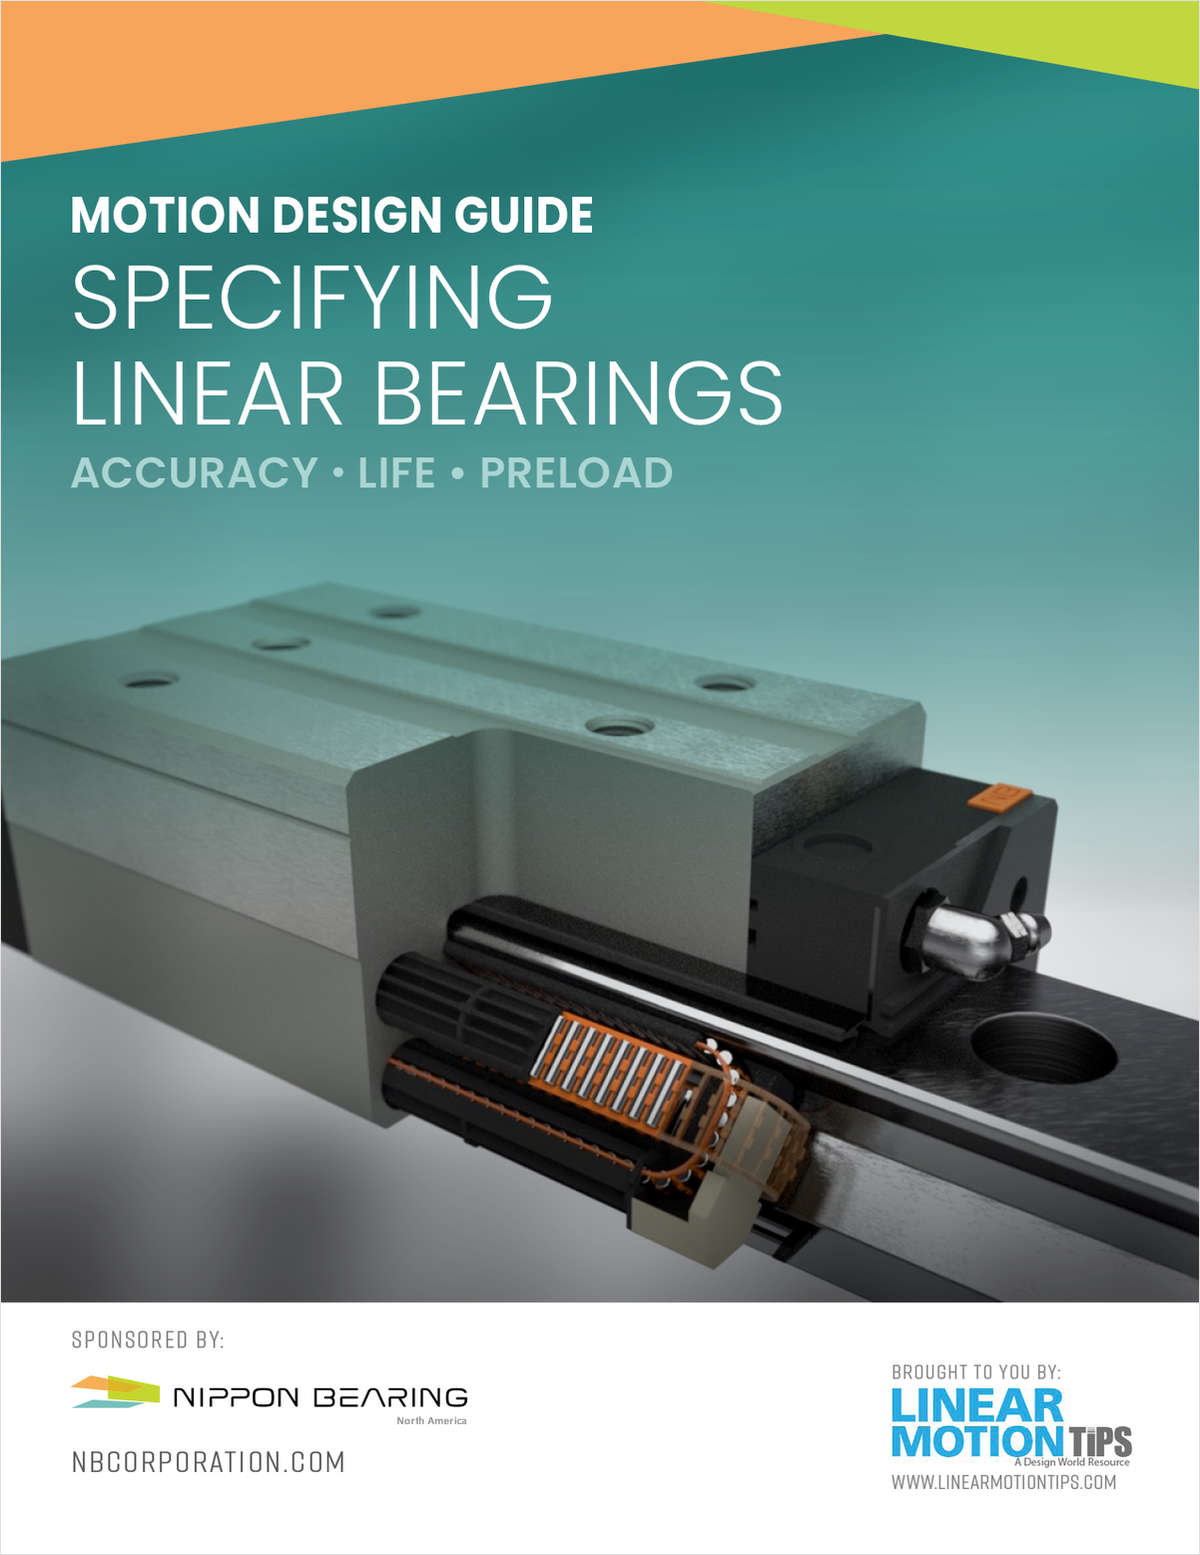 Design Guide on Specifying Linear Bearings (Accuracy  Preload  Life)